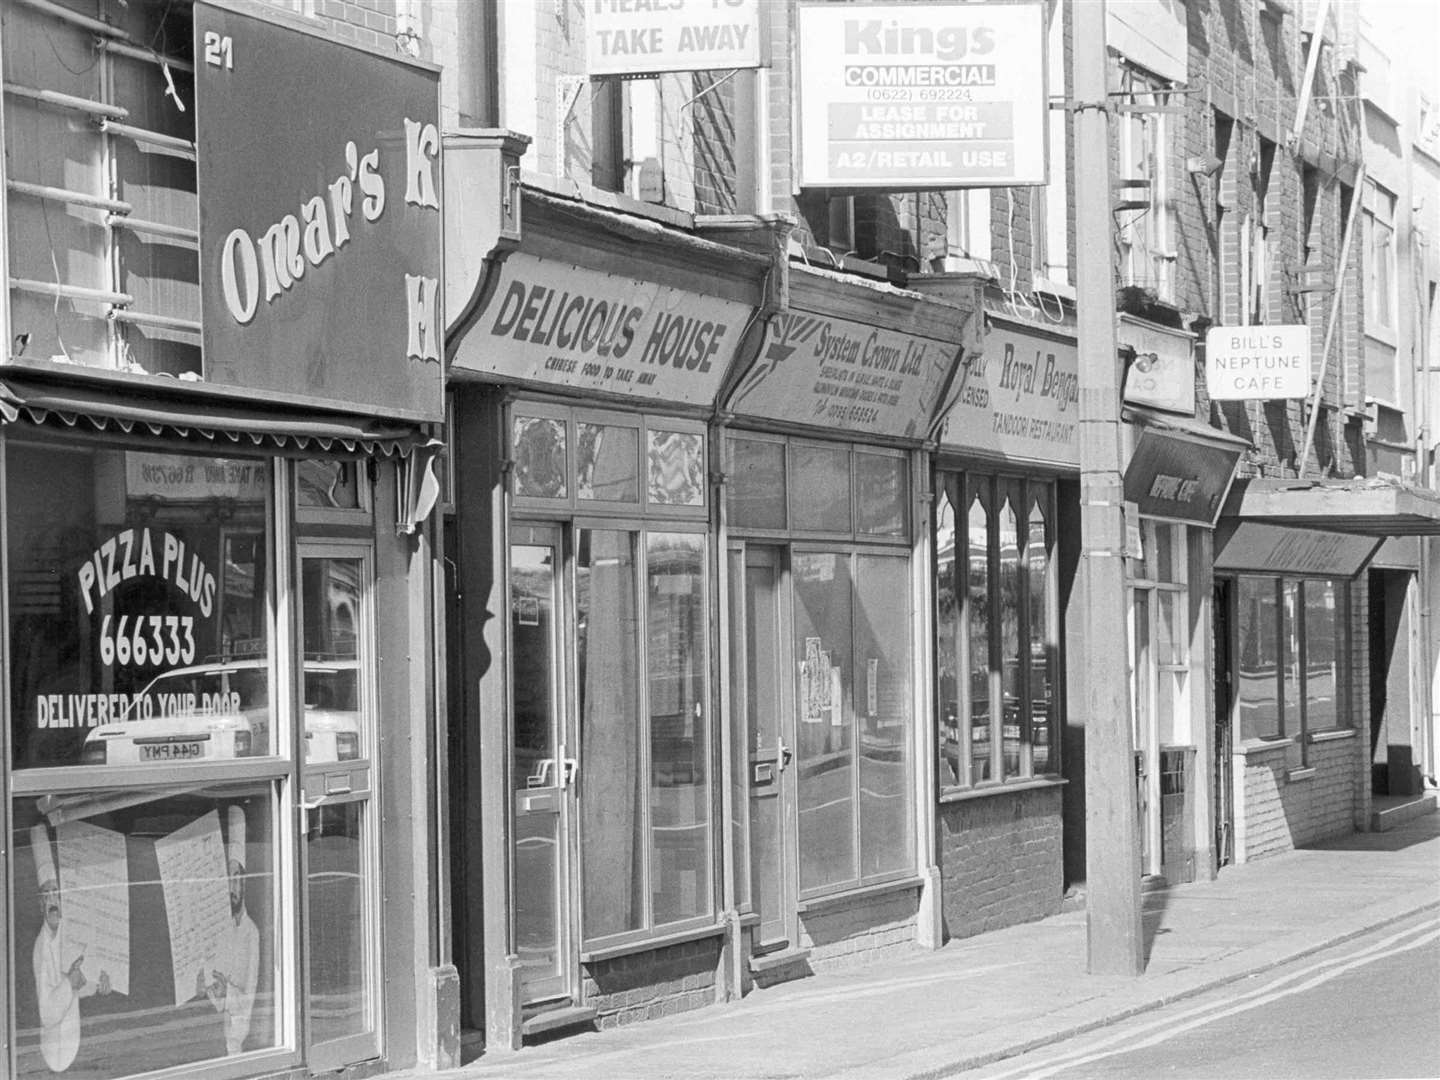 Sheerness High Street was described as "overflowing with eating houses" in April 1990. The Neptune Cafe is believed to have been the longest-running business of its type on Sheppey